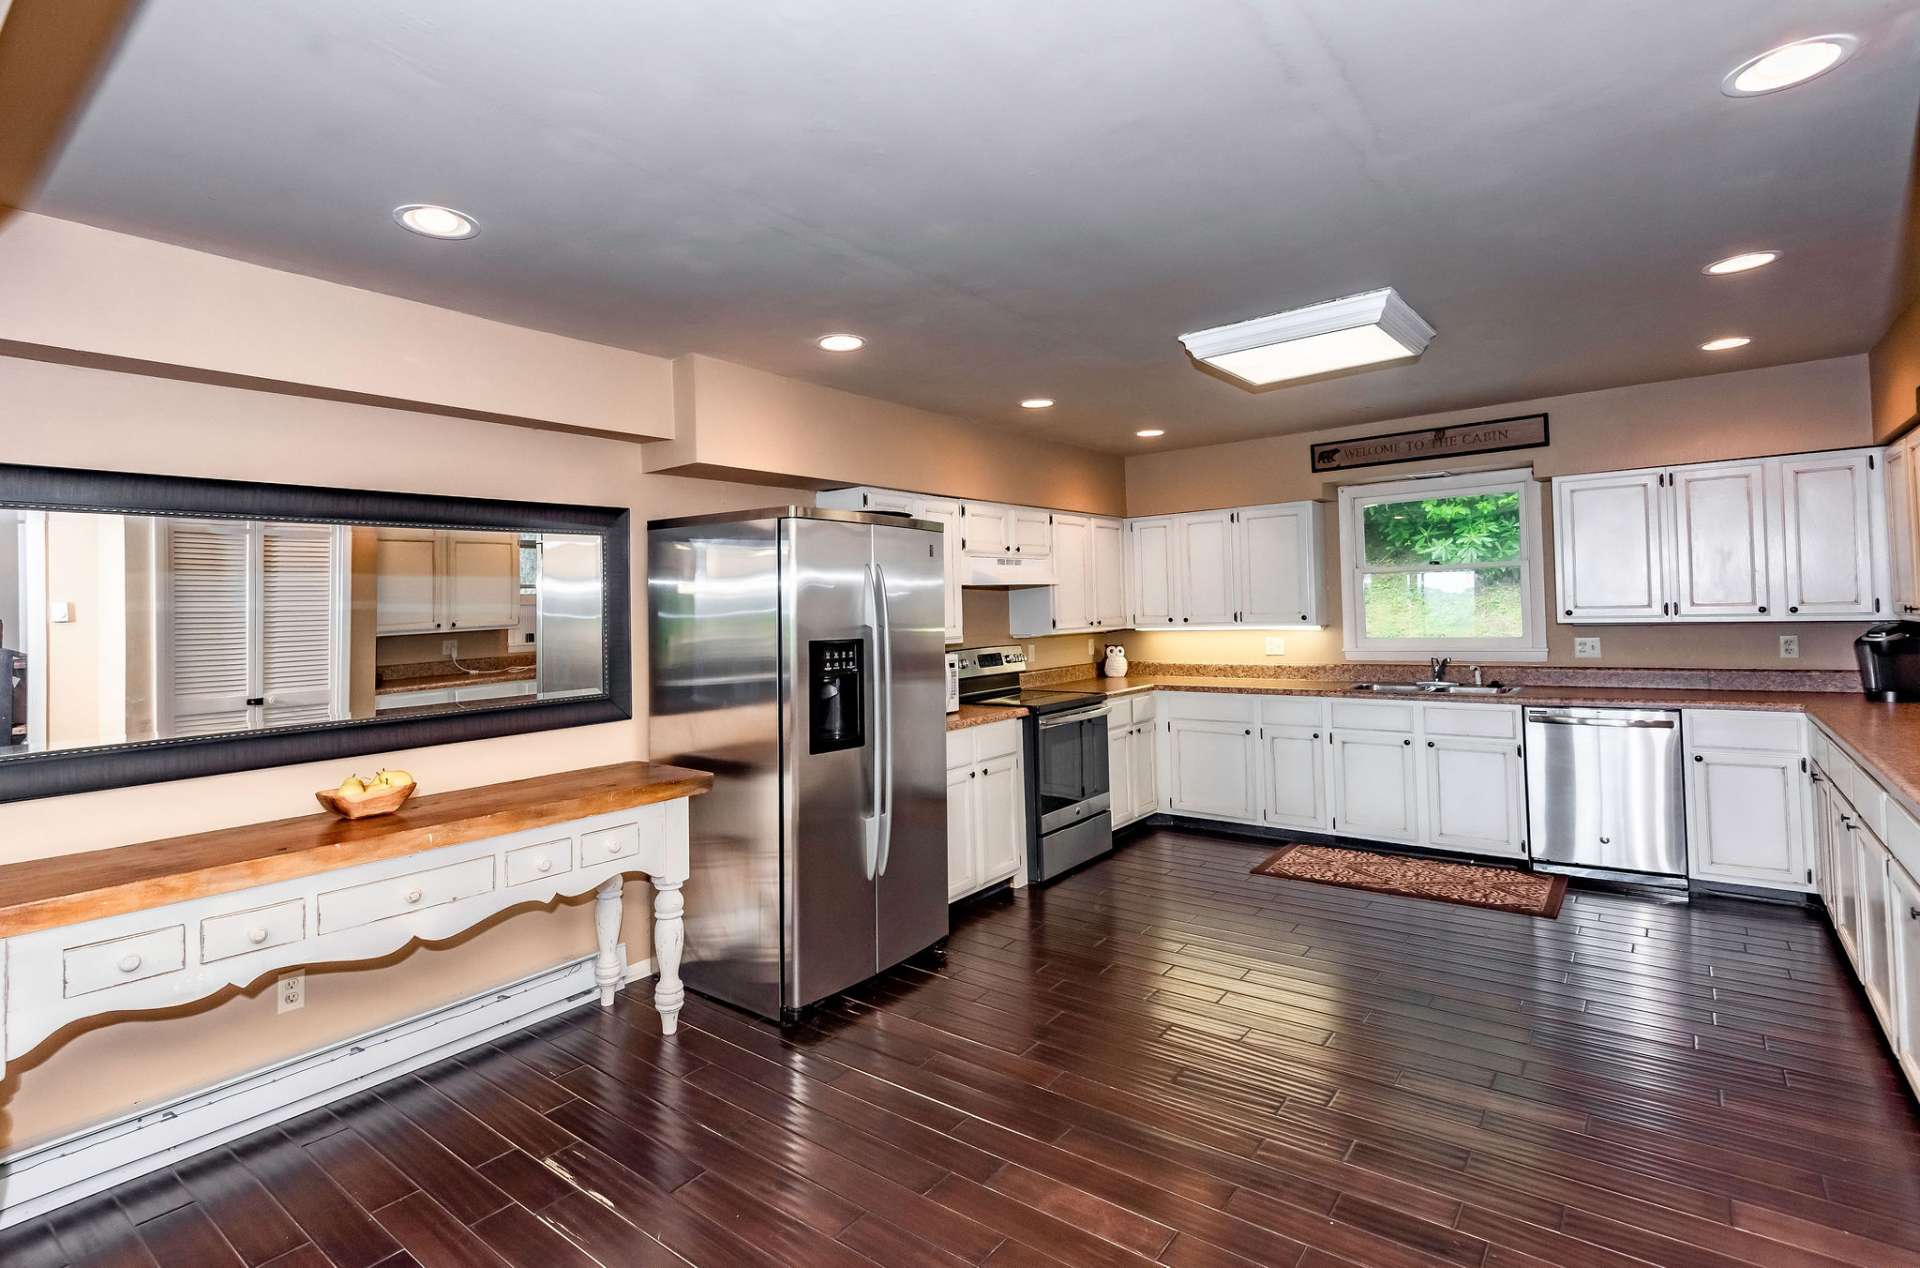 The large kitchen area is well equipped with stainless appliances, more than ample work and storage space, and plenty of room for help with the preparation and clean up of meals.